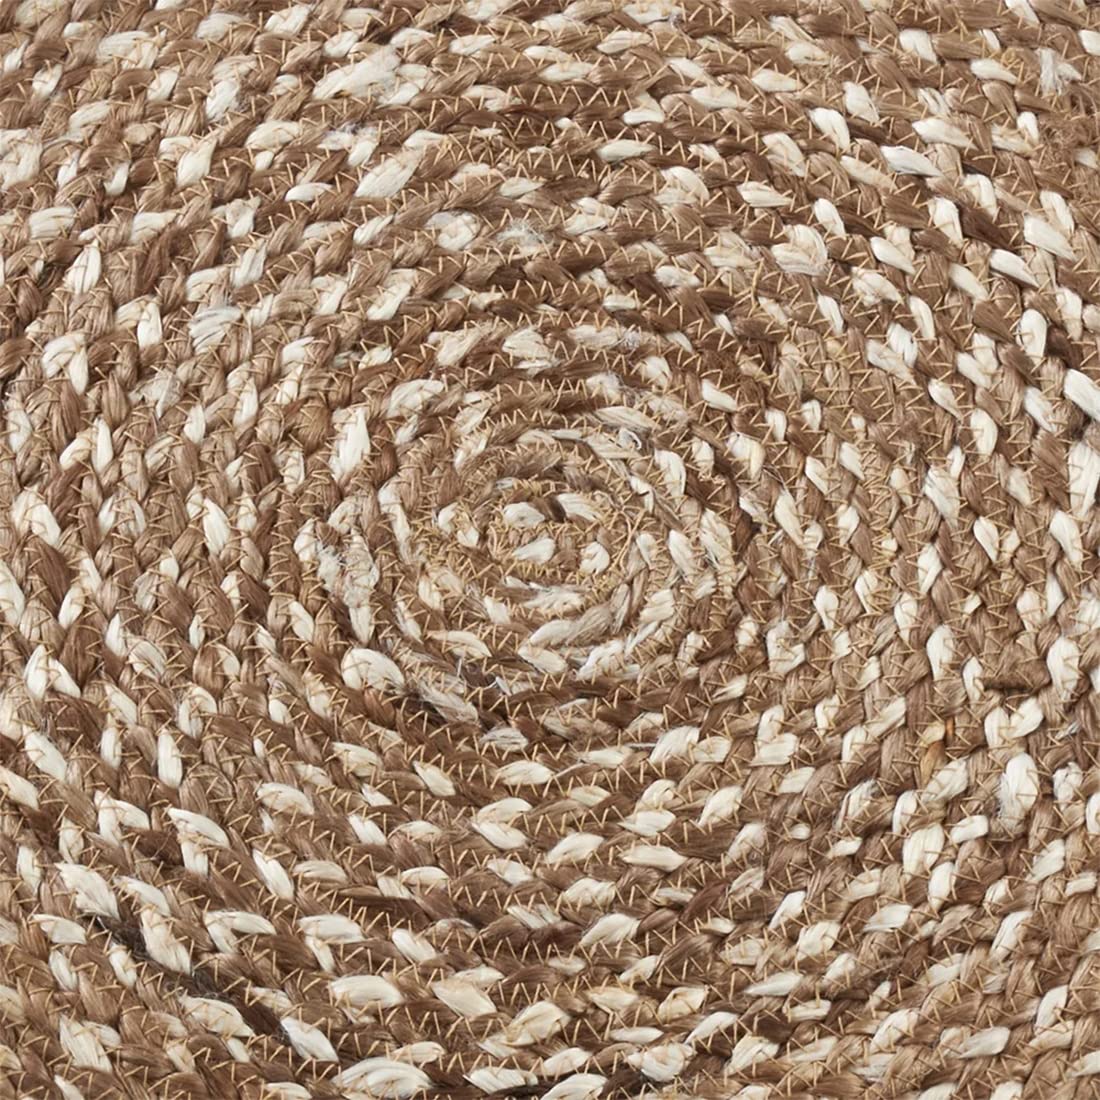 Fennco Styles 100% Jute Woven Design Farmhouse Placemats 16 Inch Round, Set of 4 - Natural Braided Table Mats for Home, Dining Room, Banquets, Family Gathering and Special Occasion